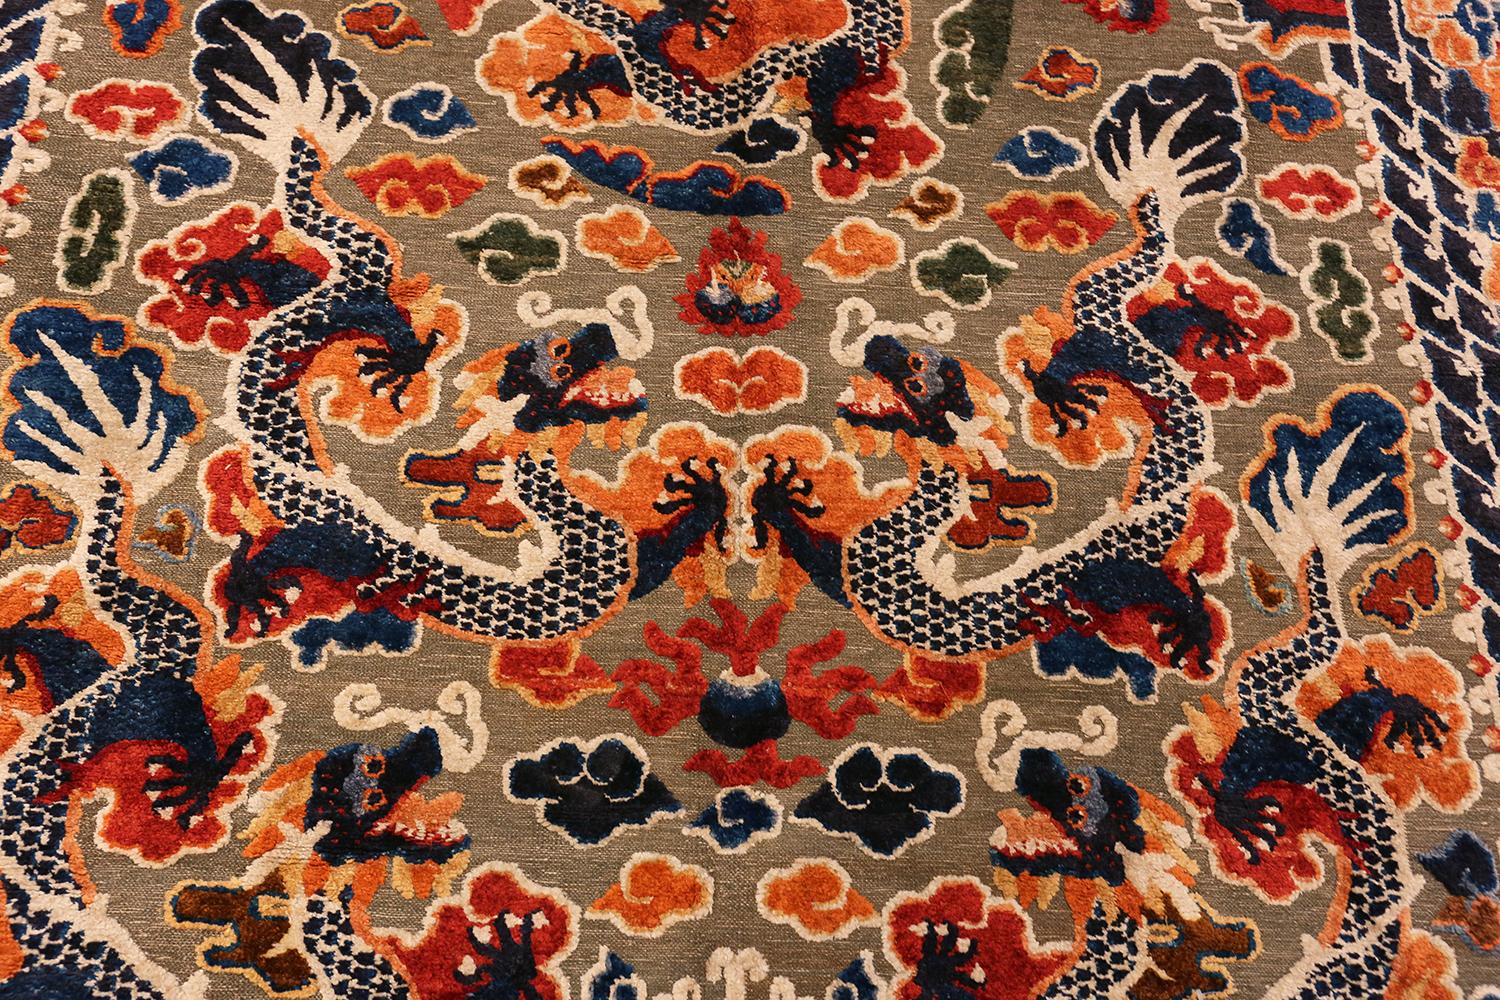 Chinese Chippendale Collectible Antique Silk and Metallic Thread Chinese Dragon Rug. 6 ft x 9 ft 3in